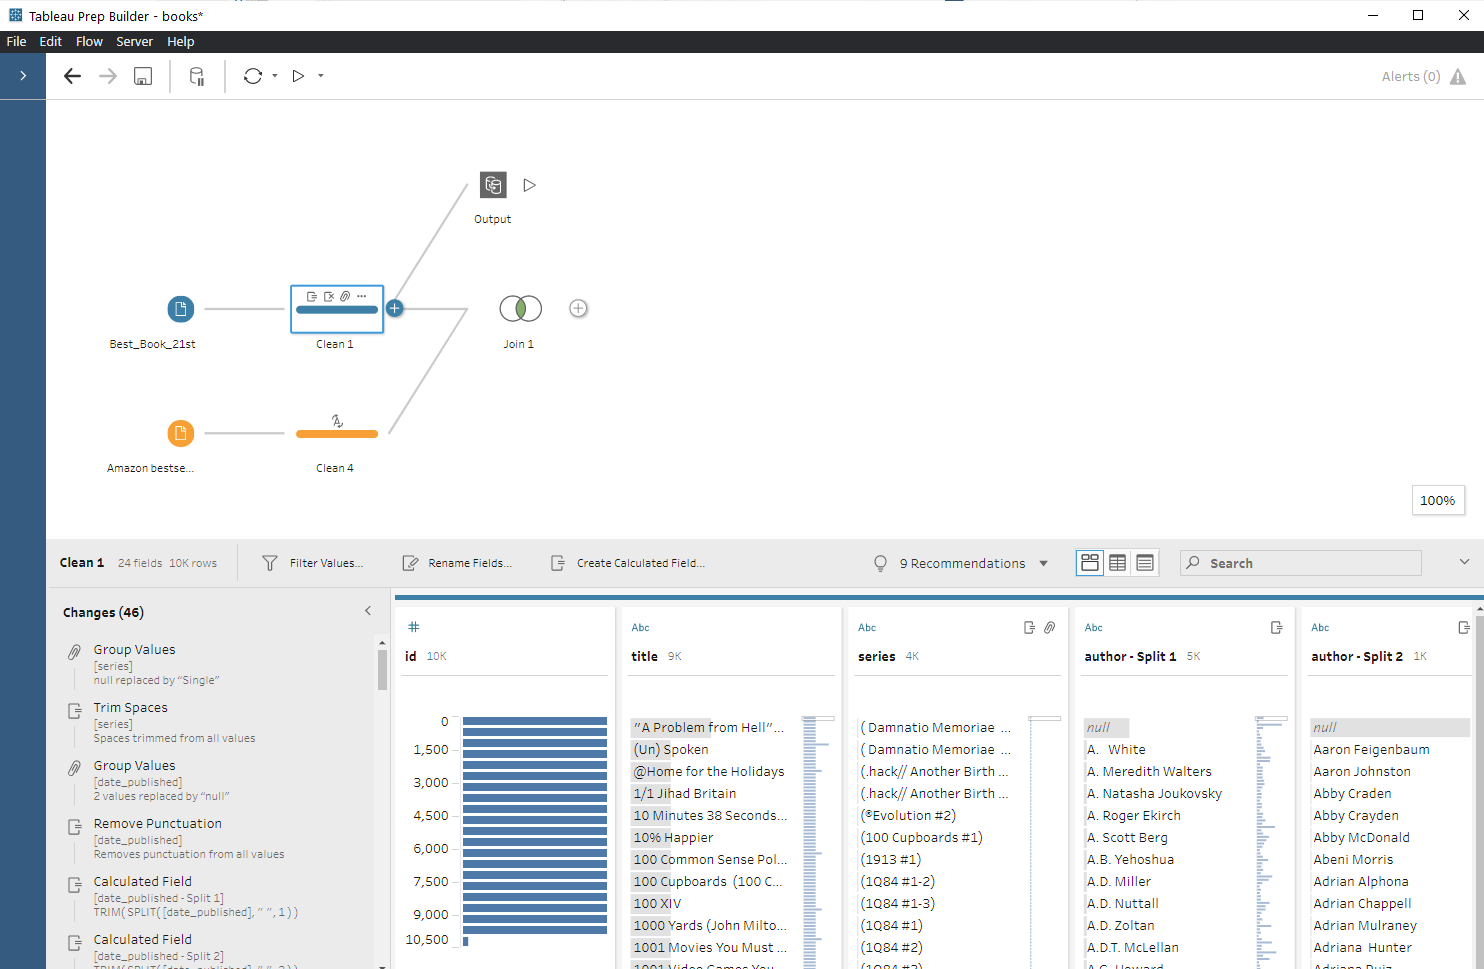 Data sources being cleaned, joined, and exported in Tableau Prep Builder.